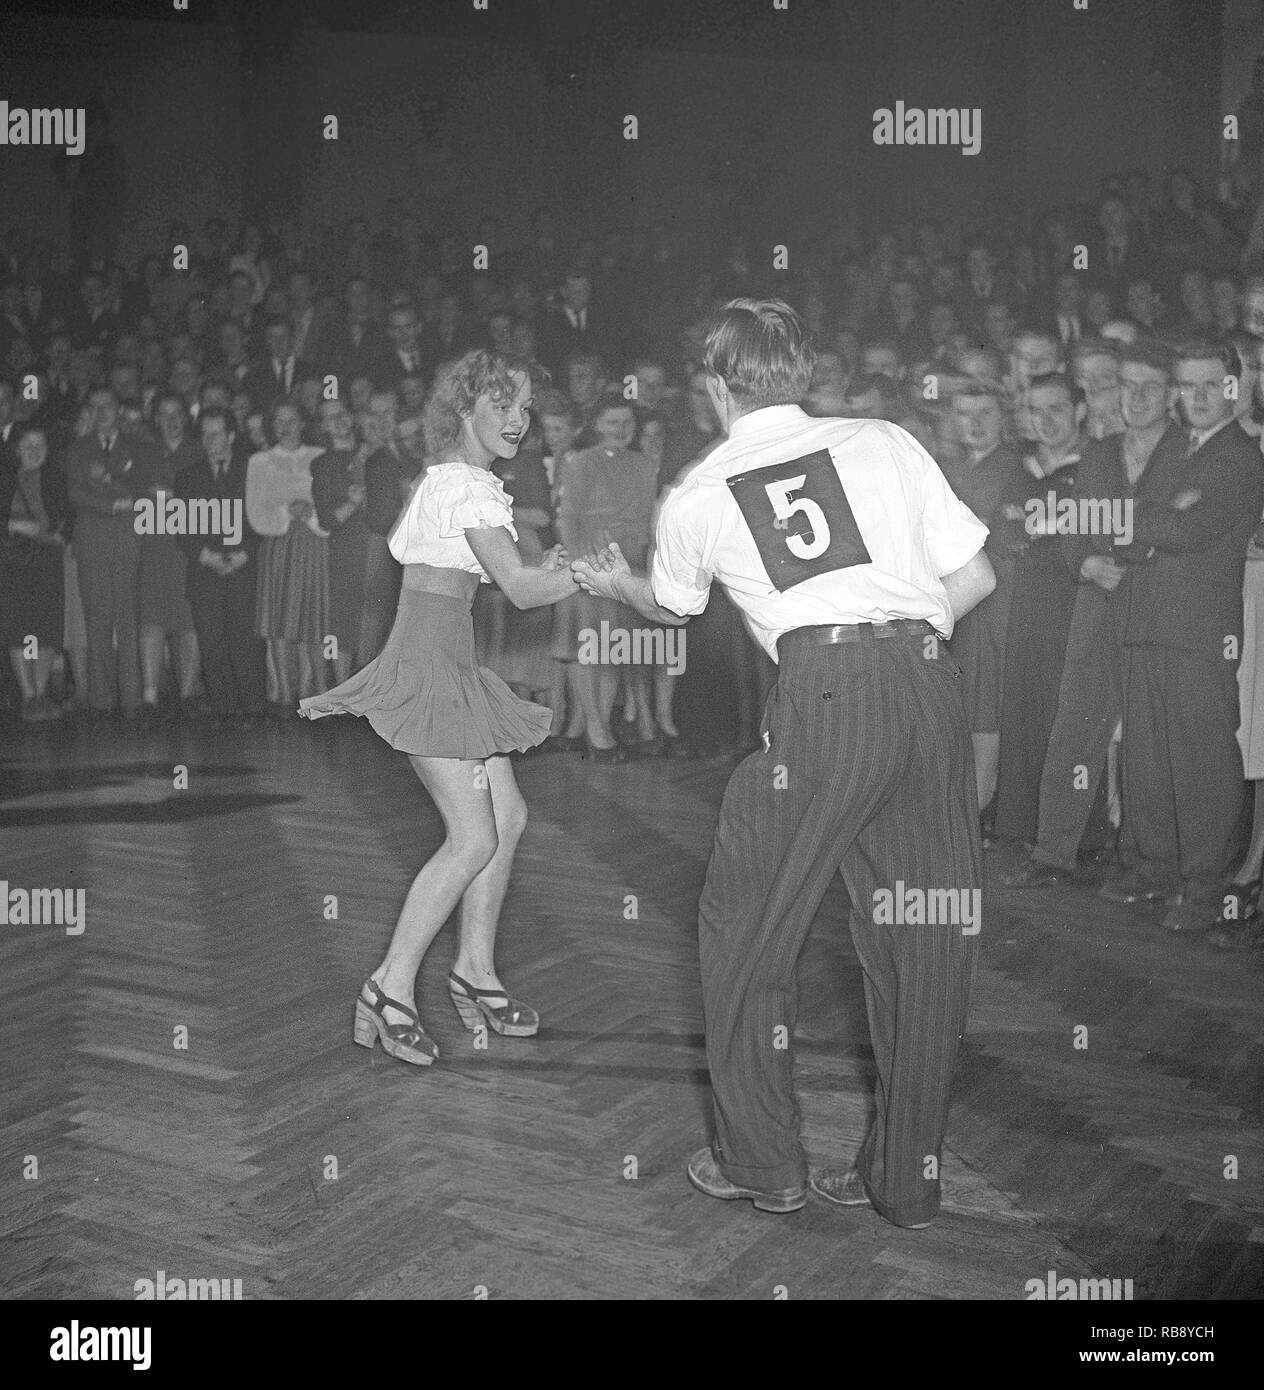 Jitterbug dance. A dance popularized in the United states and spread by American soldiers and sailors around the world during the Second world war. Pictured here Willy Schutze and Lizzi Larsen when dancing the Jitterbug dance 1948 during a competition dance event. Photo: Kristoffersson ref AM58-5 Stock Photo